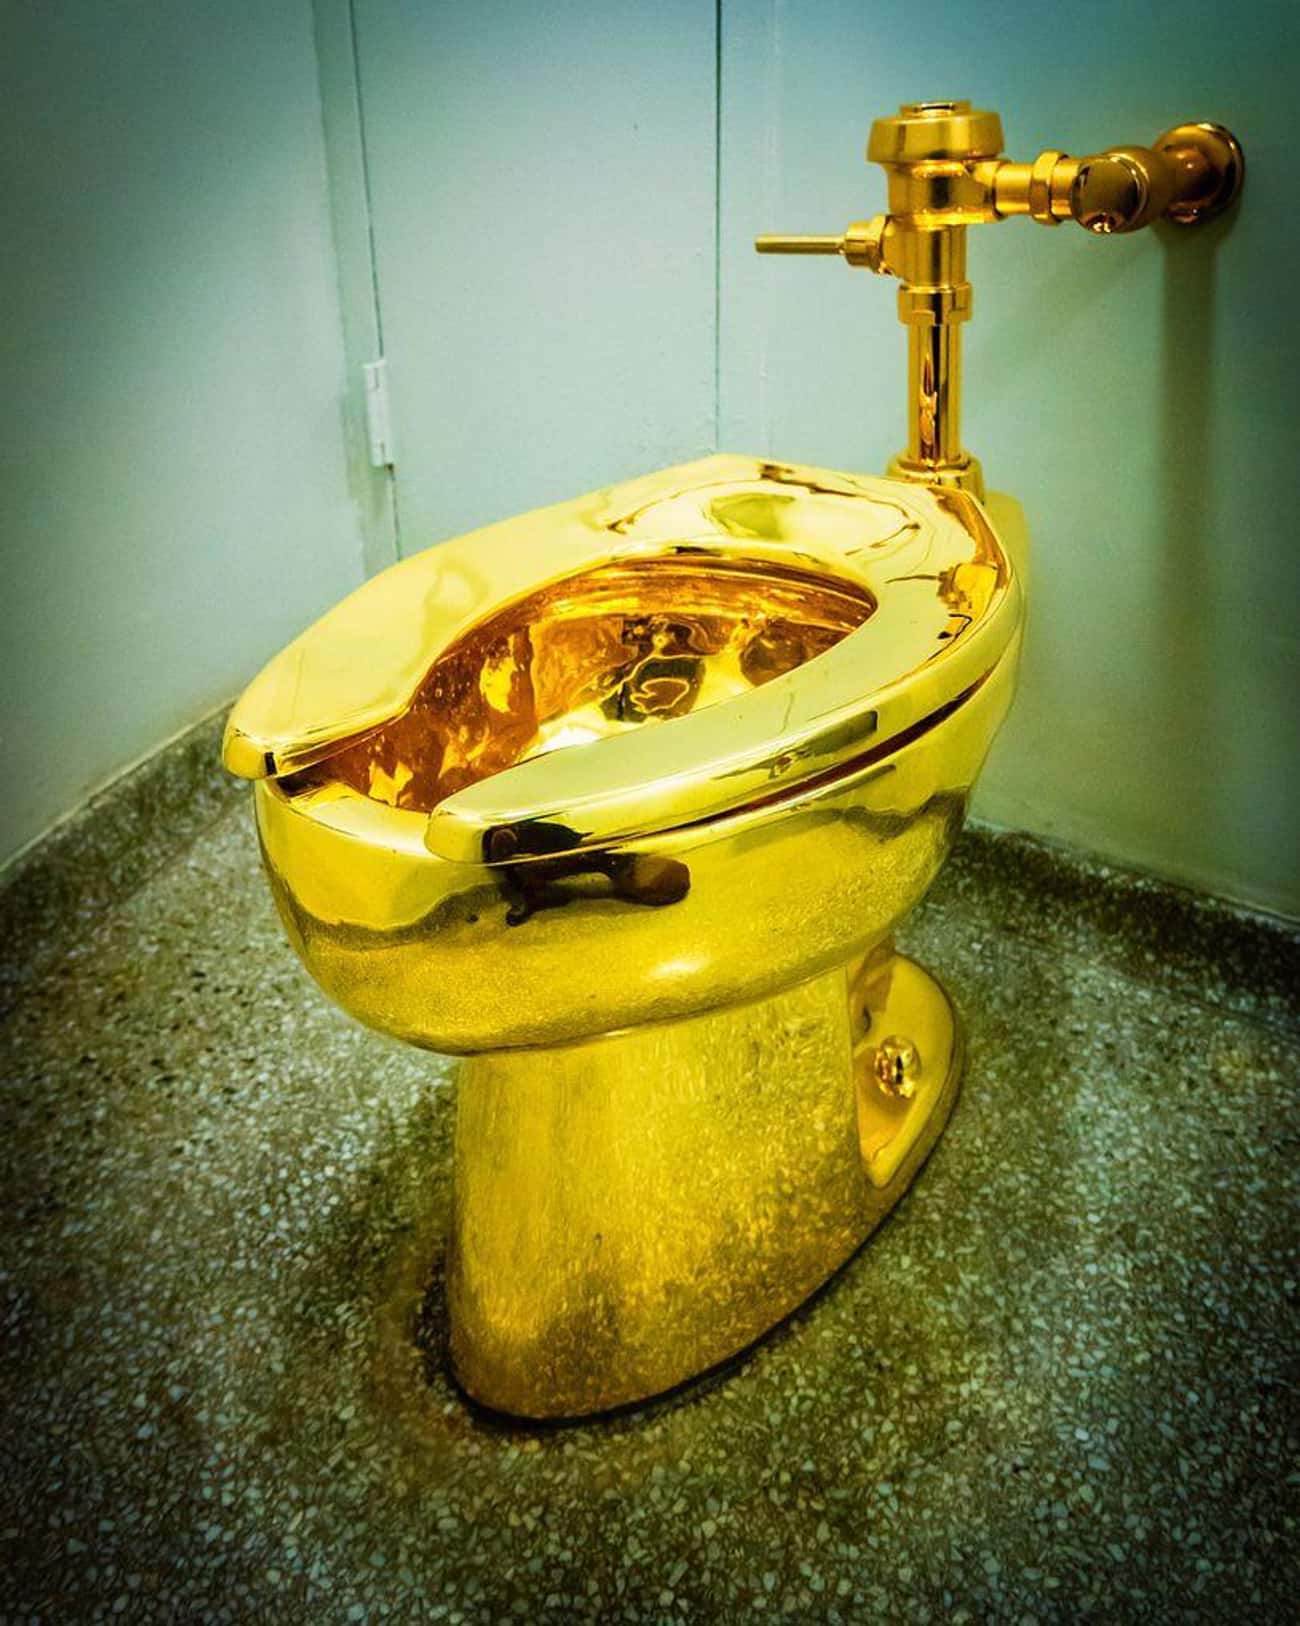 The Gold Toilet In New York